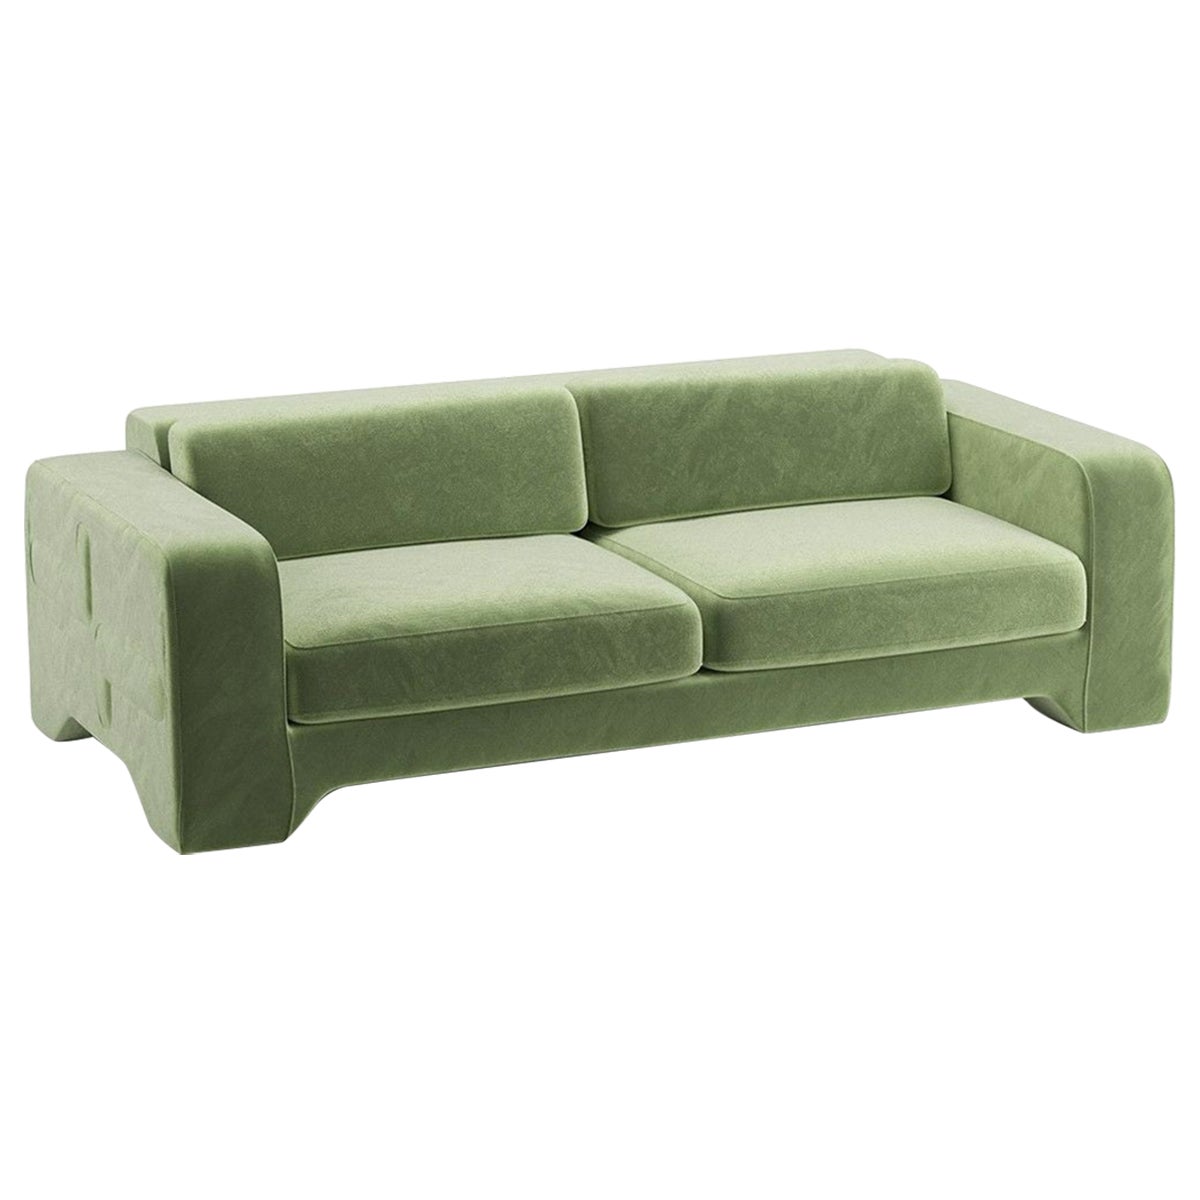 Popus Editions Giovanna 3 Seater Sofa in Green Verone Velvet Upholstery For Sale